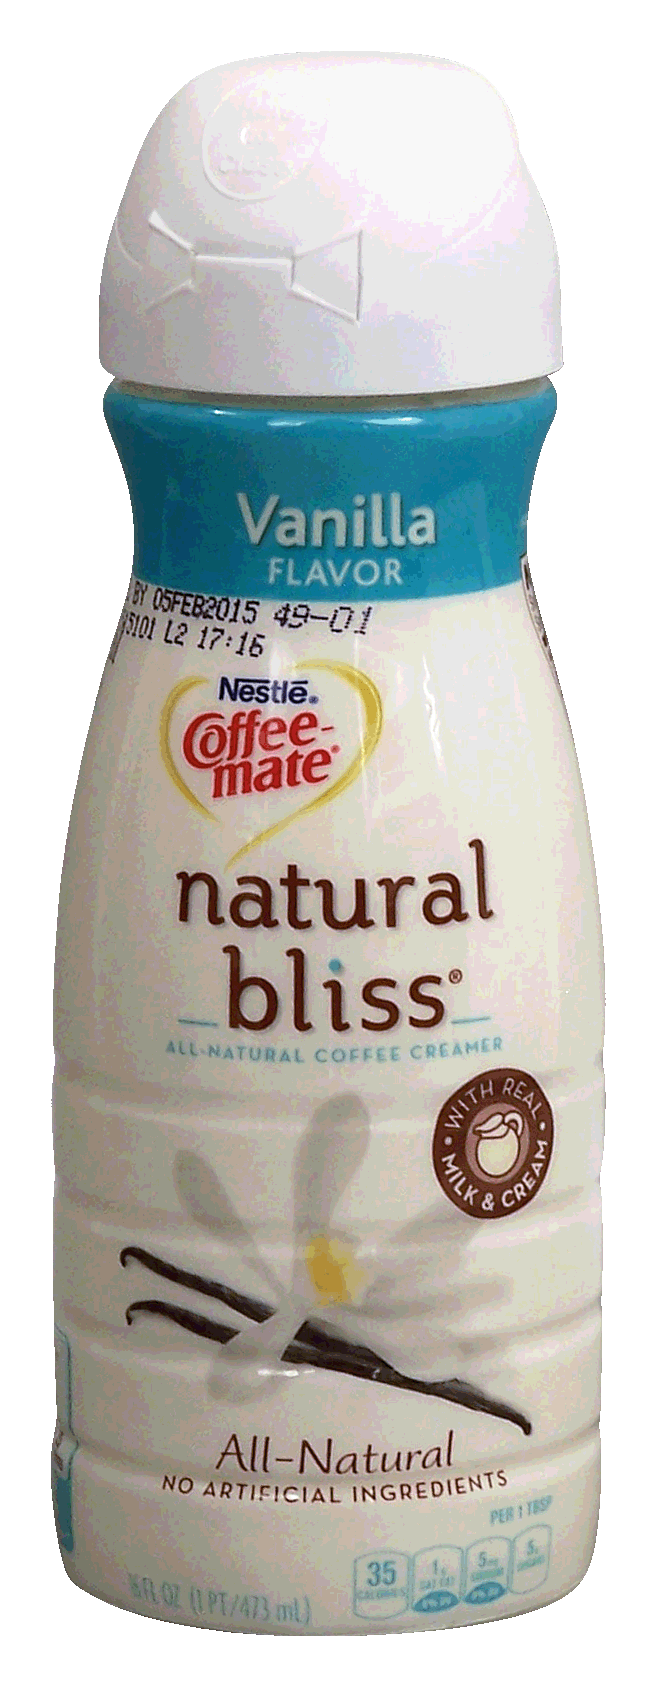 Nestle natural bliss coffee-mate; vanilla flavored all-natural coffee creamer, with real milk & cream Full-Size Picture